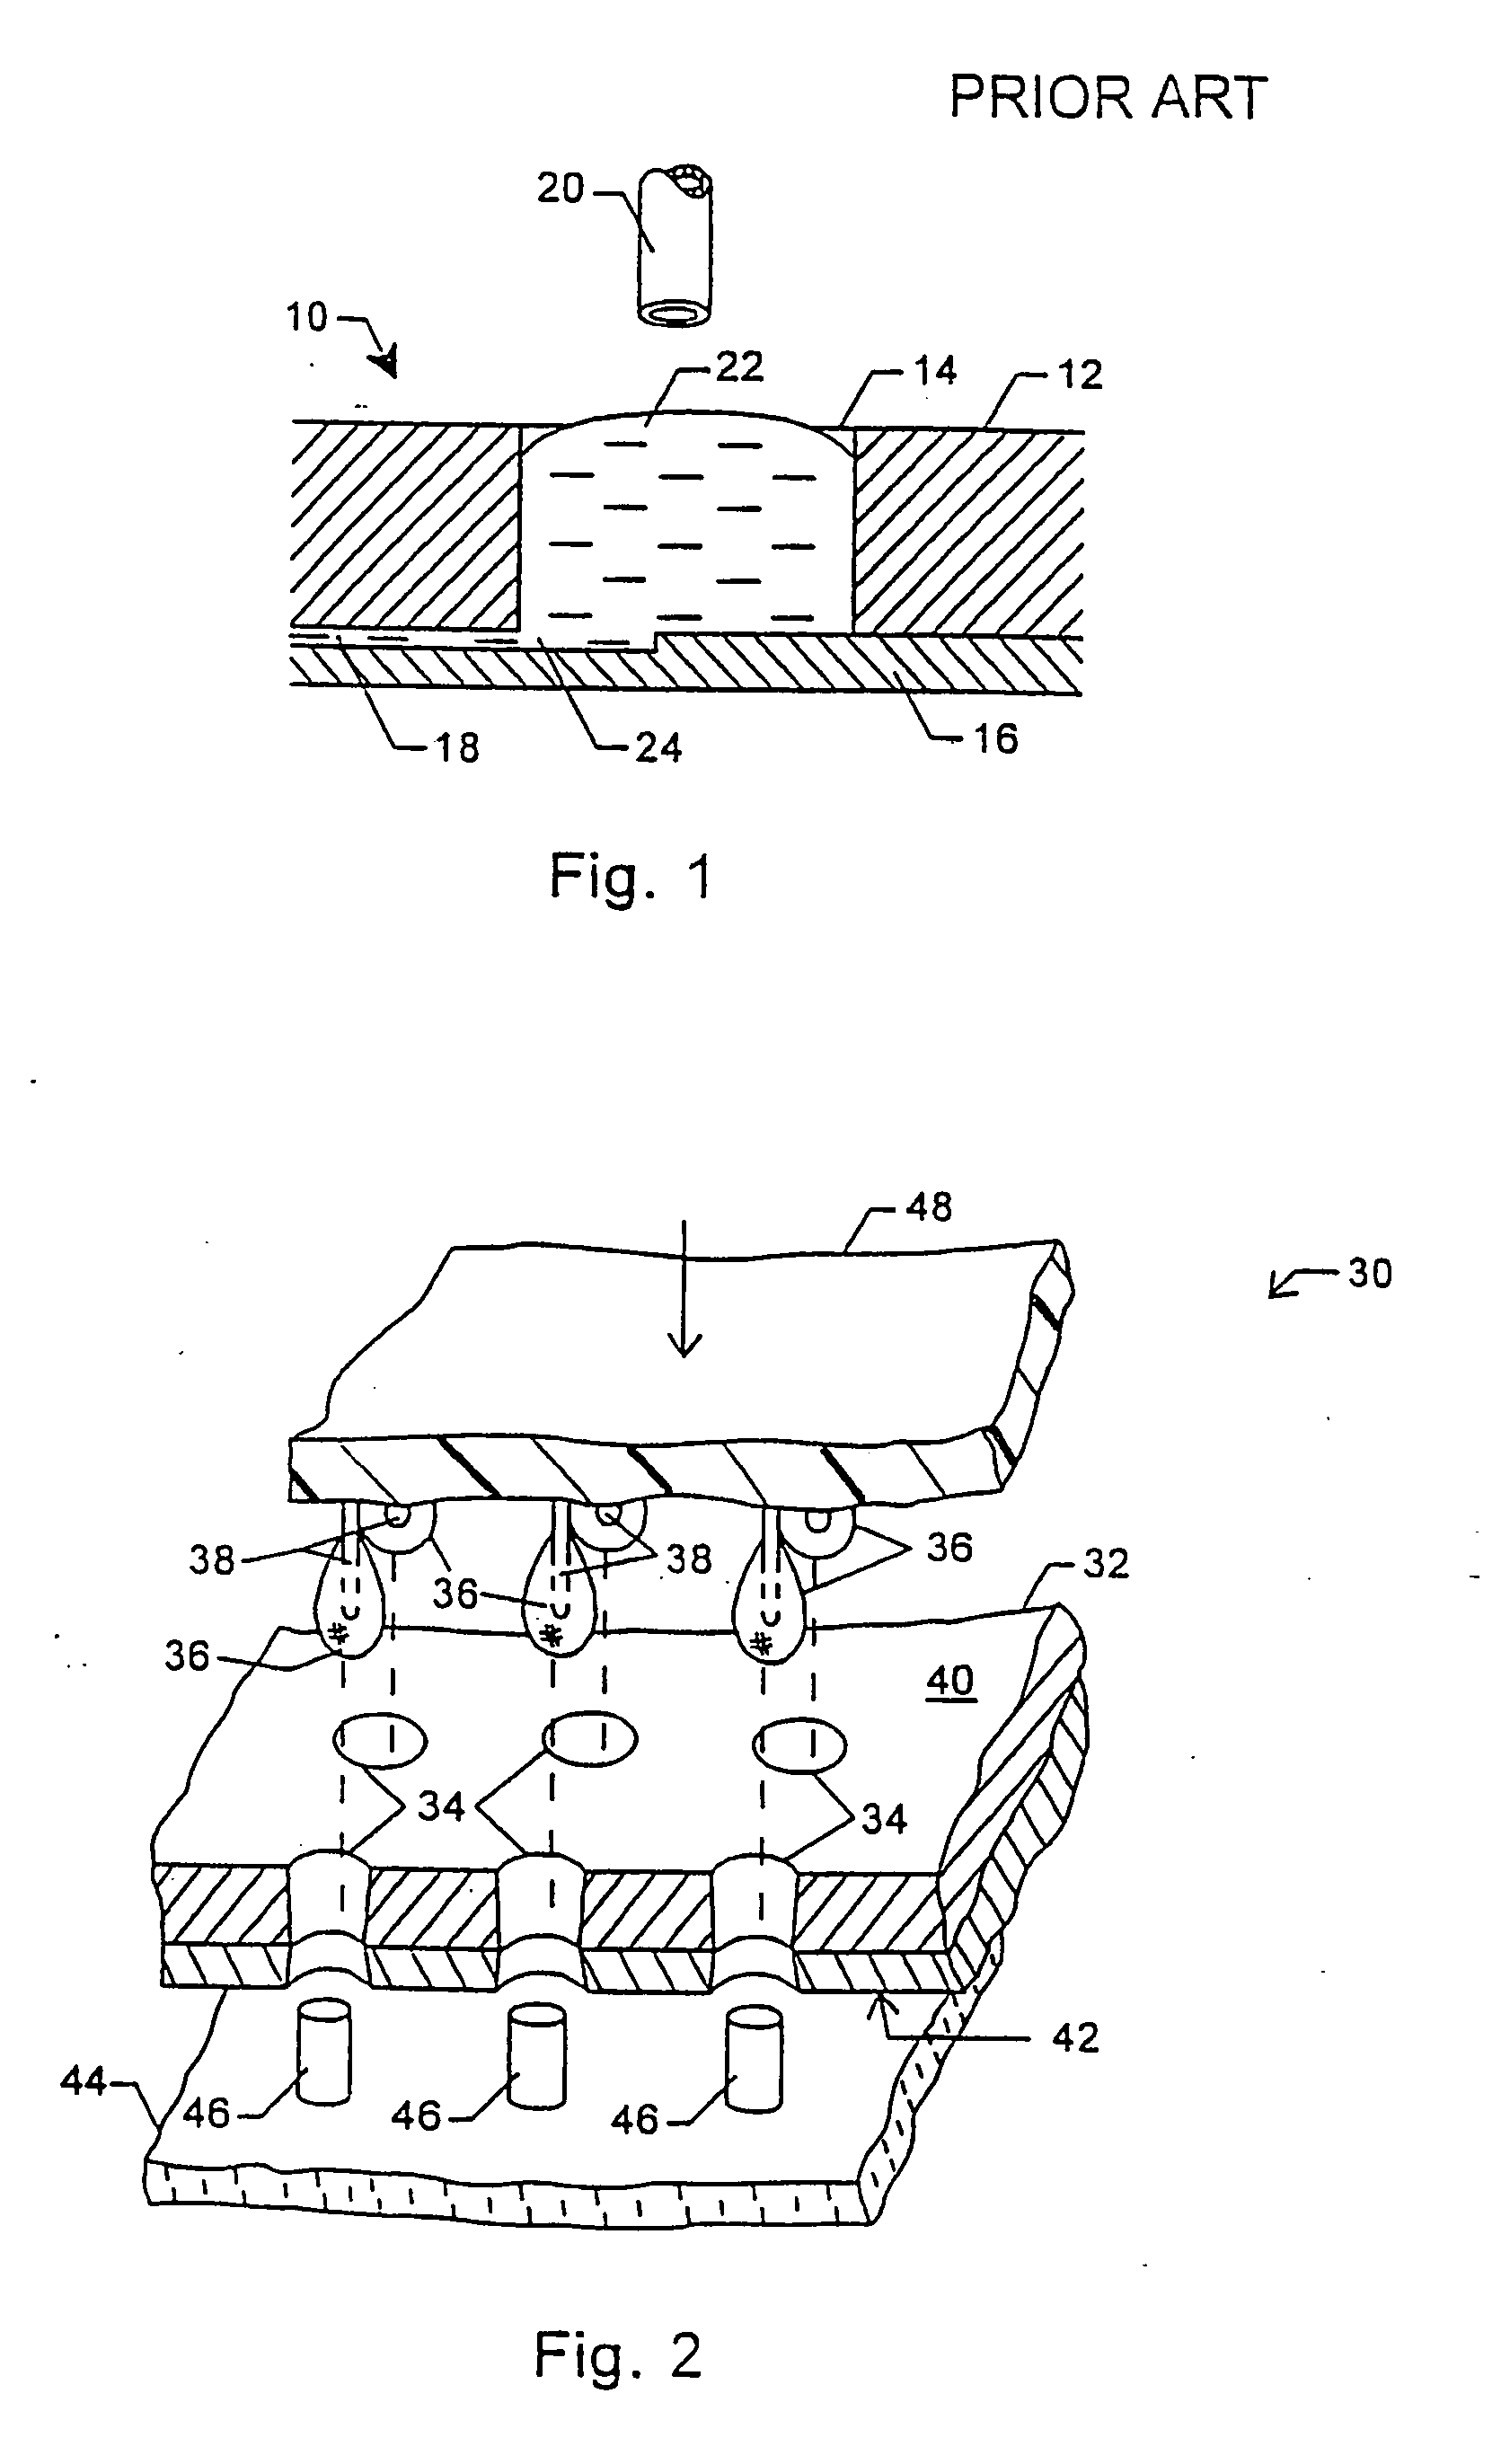 Microfabricated structures for facilitating fluid introduction into microfluidic devices